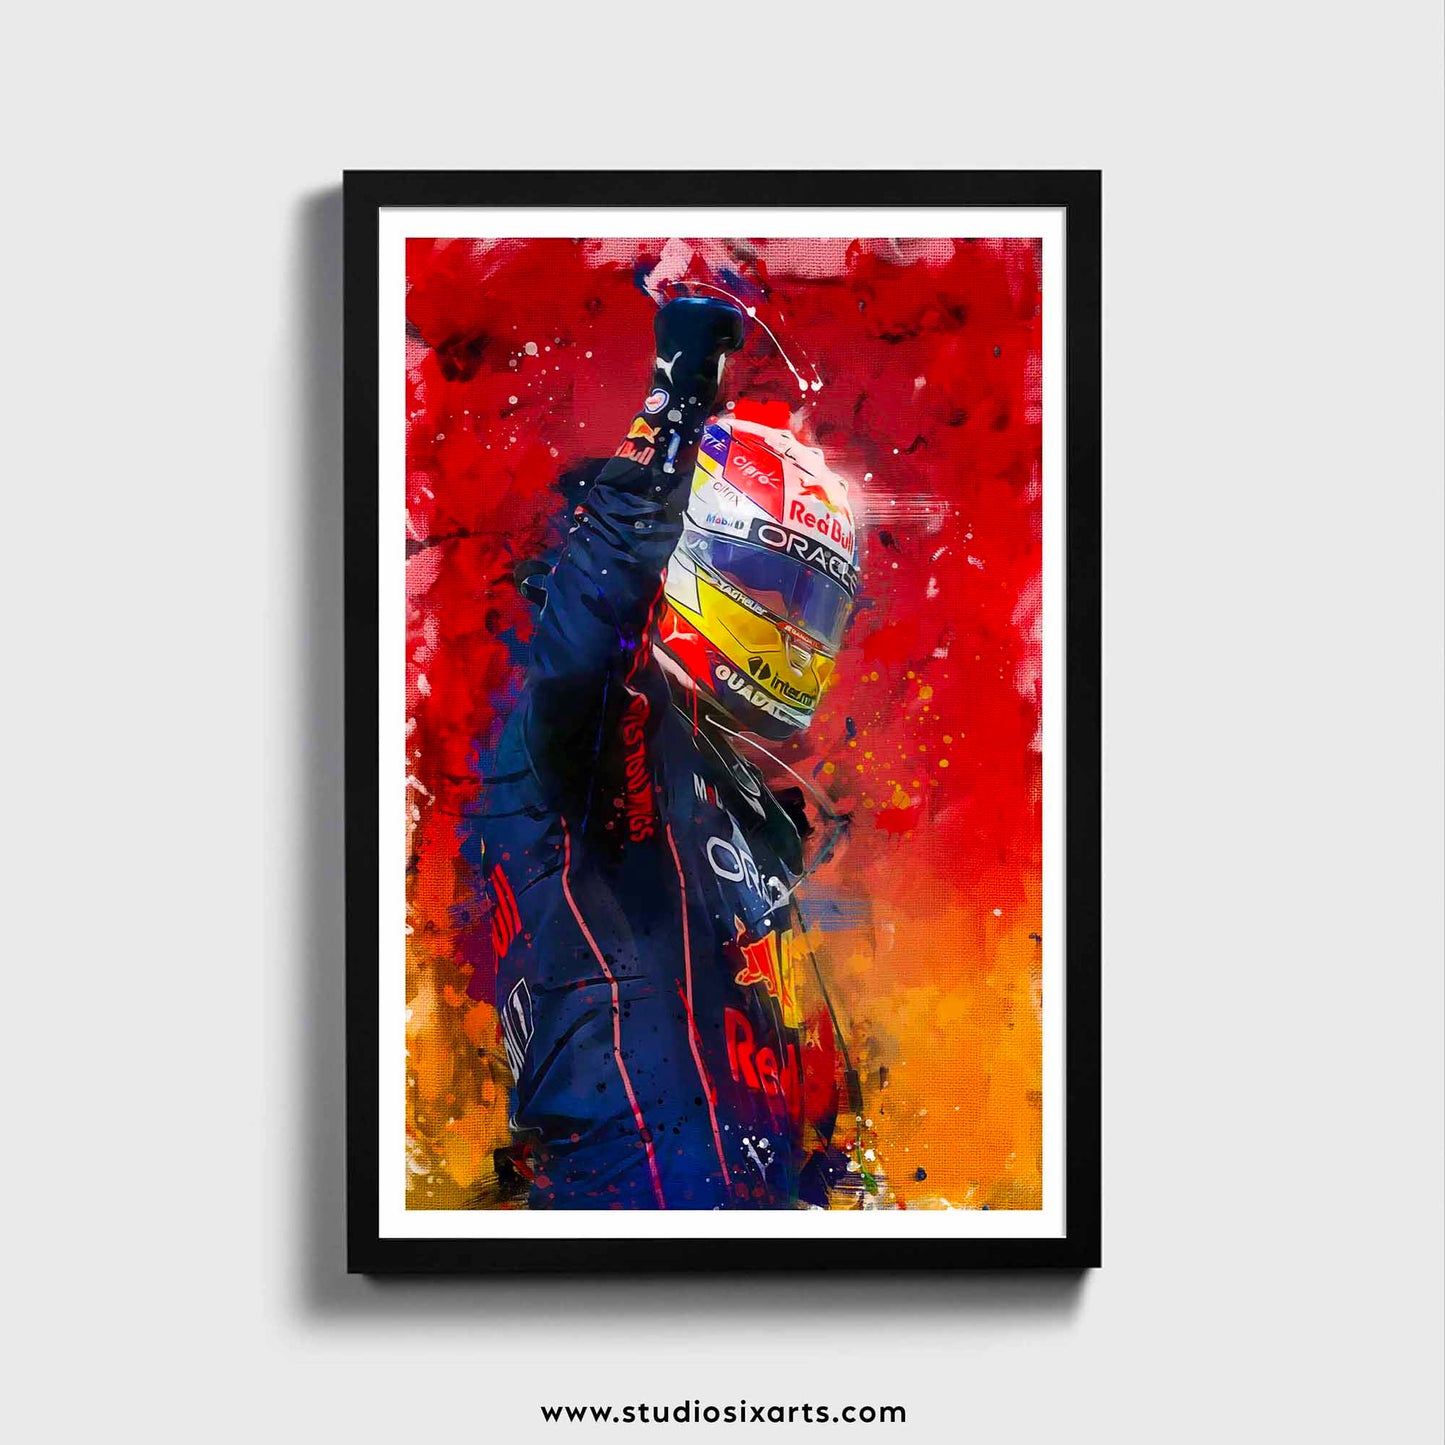 Max Verstappen Poster and Canvas, F1 Decor, F1 Driver Print